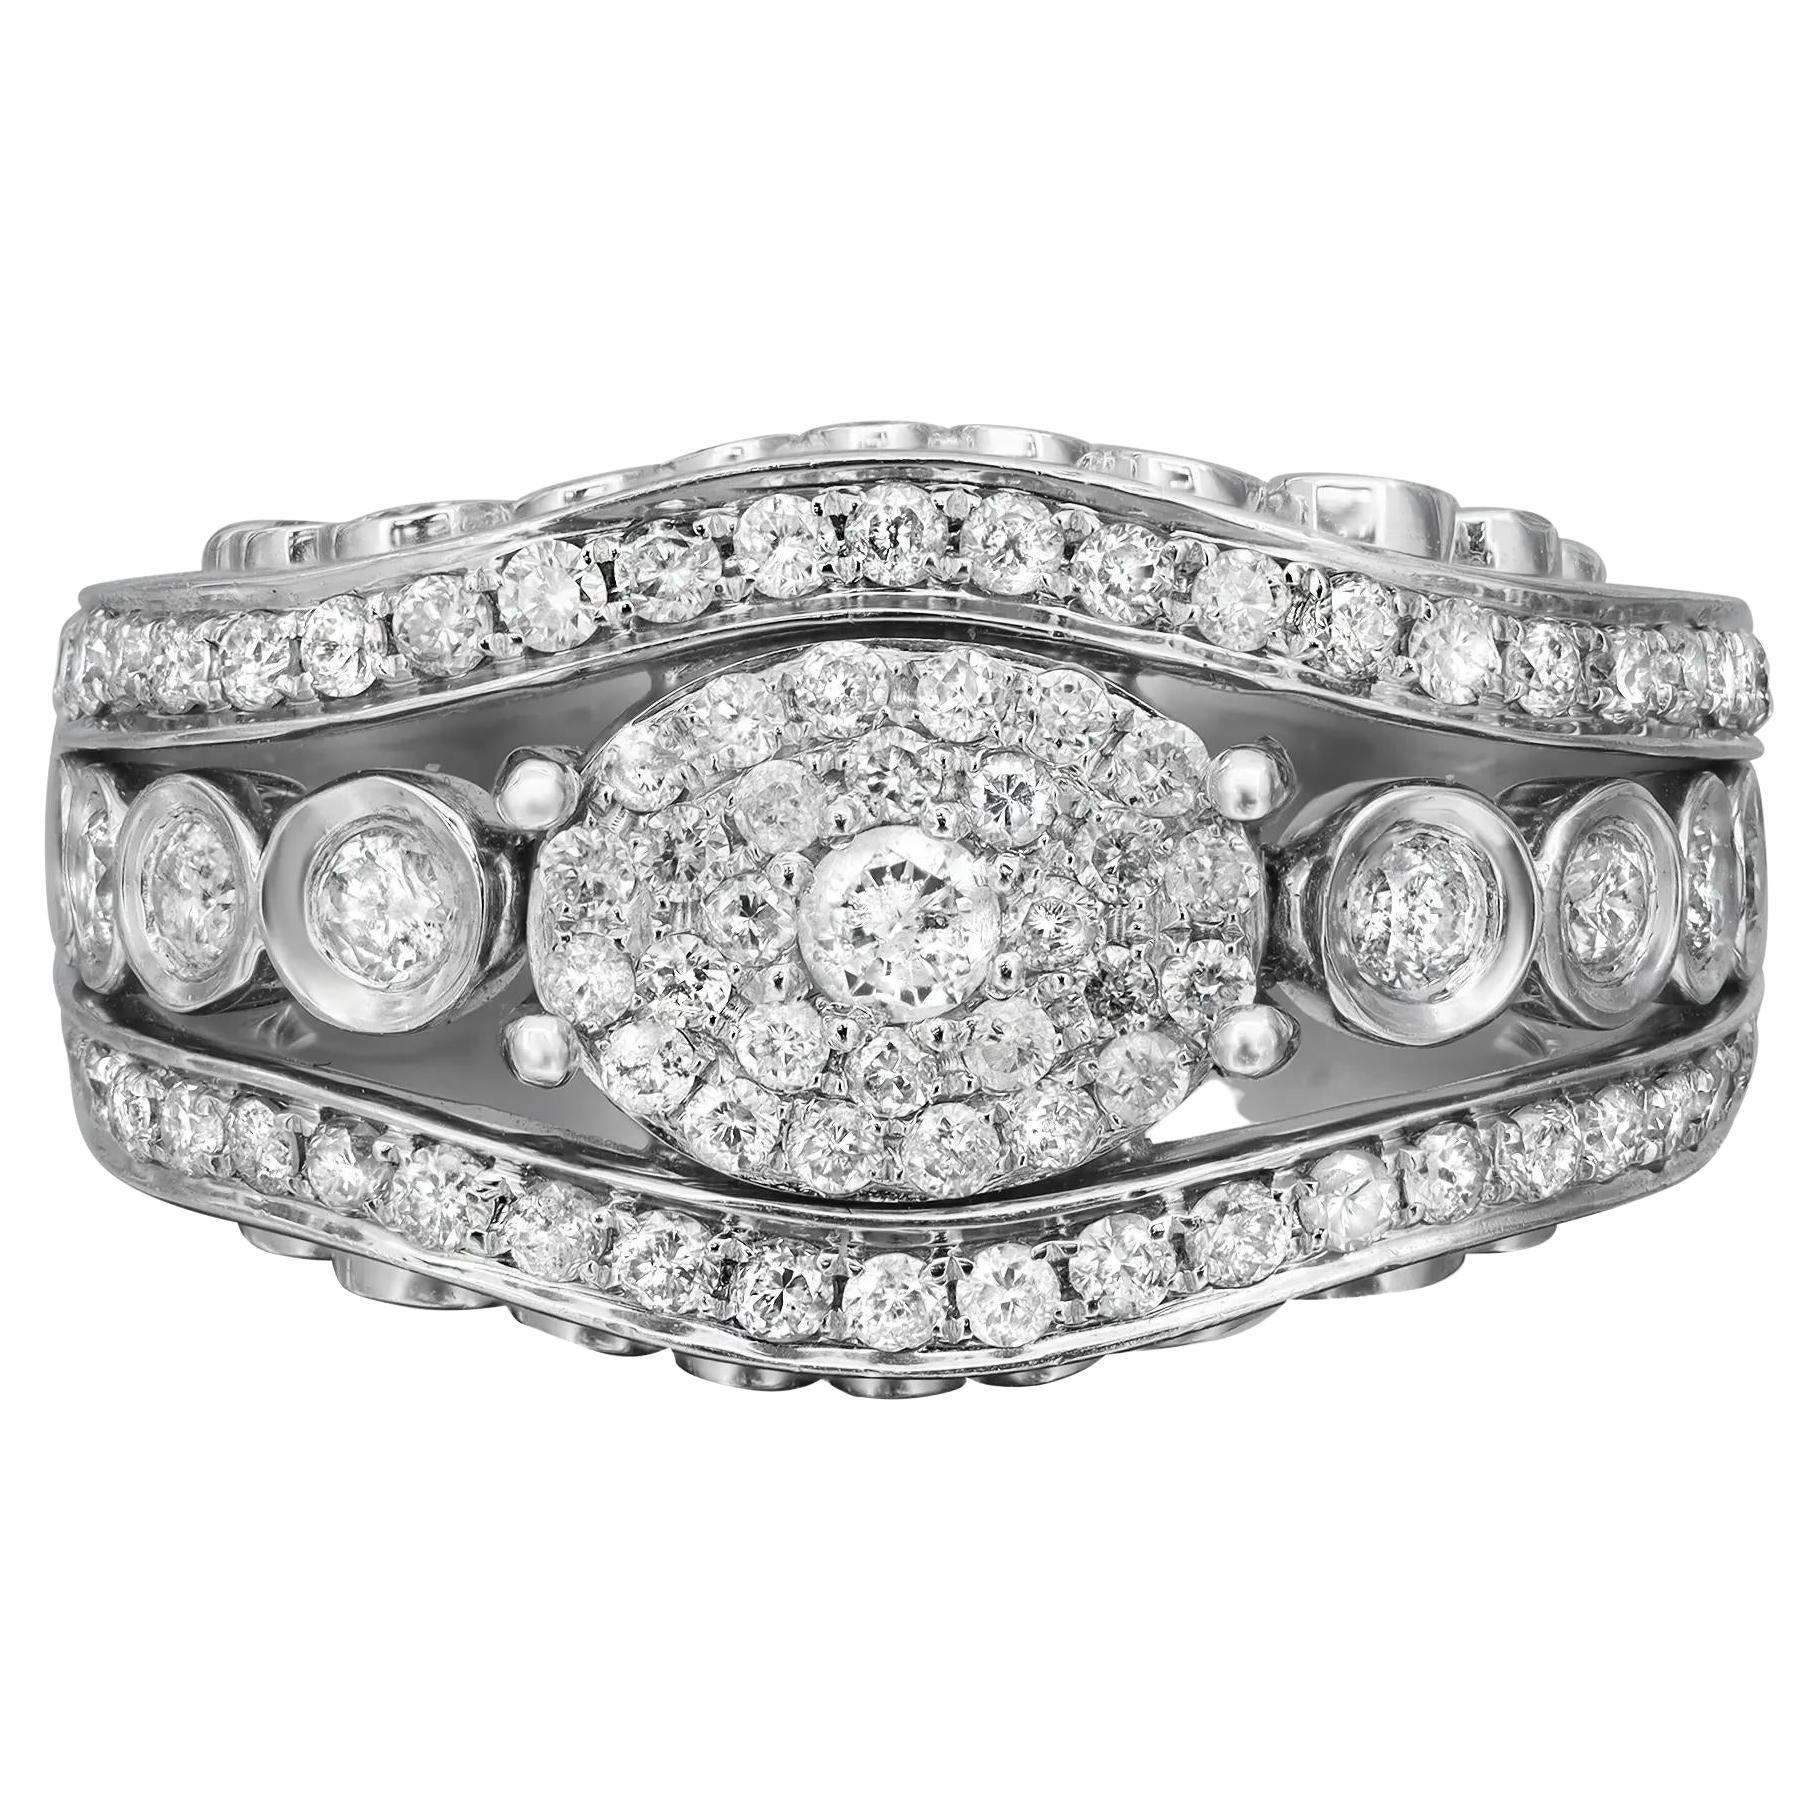 1.56cttw Pave and Bezel Set Round Diamond Cocktail Ring 14k White Gold